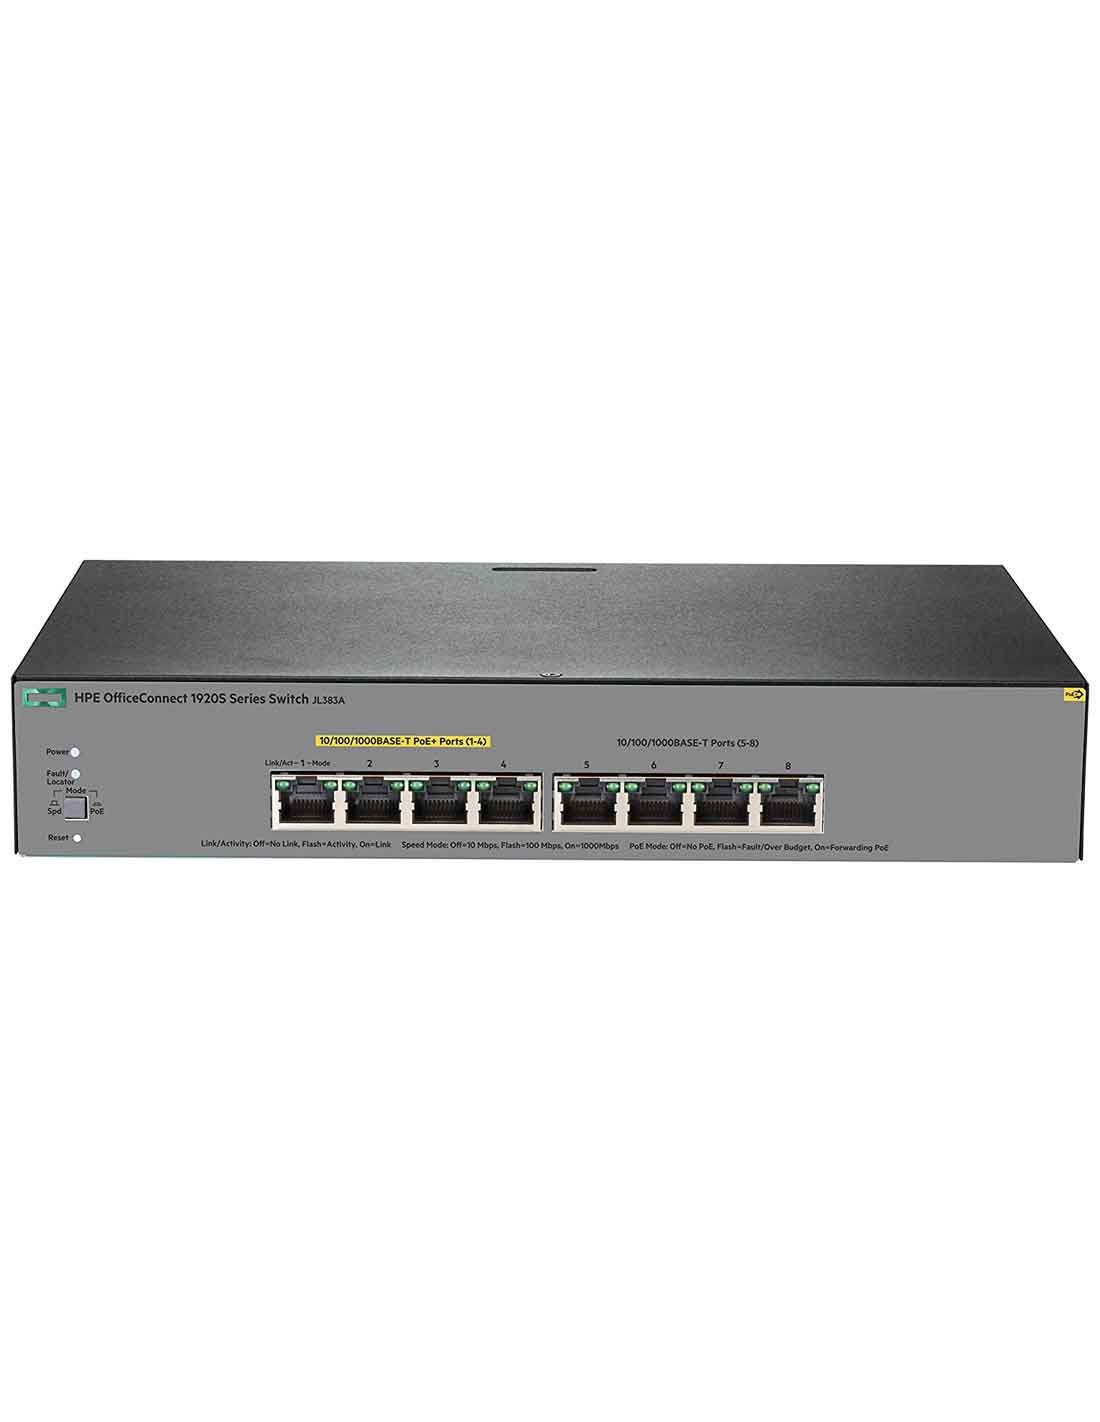 HPE 1920S 8-Port PPoE+ 65W Switch JL383A at a cheap price and free delivery in Dubai